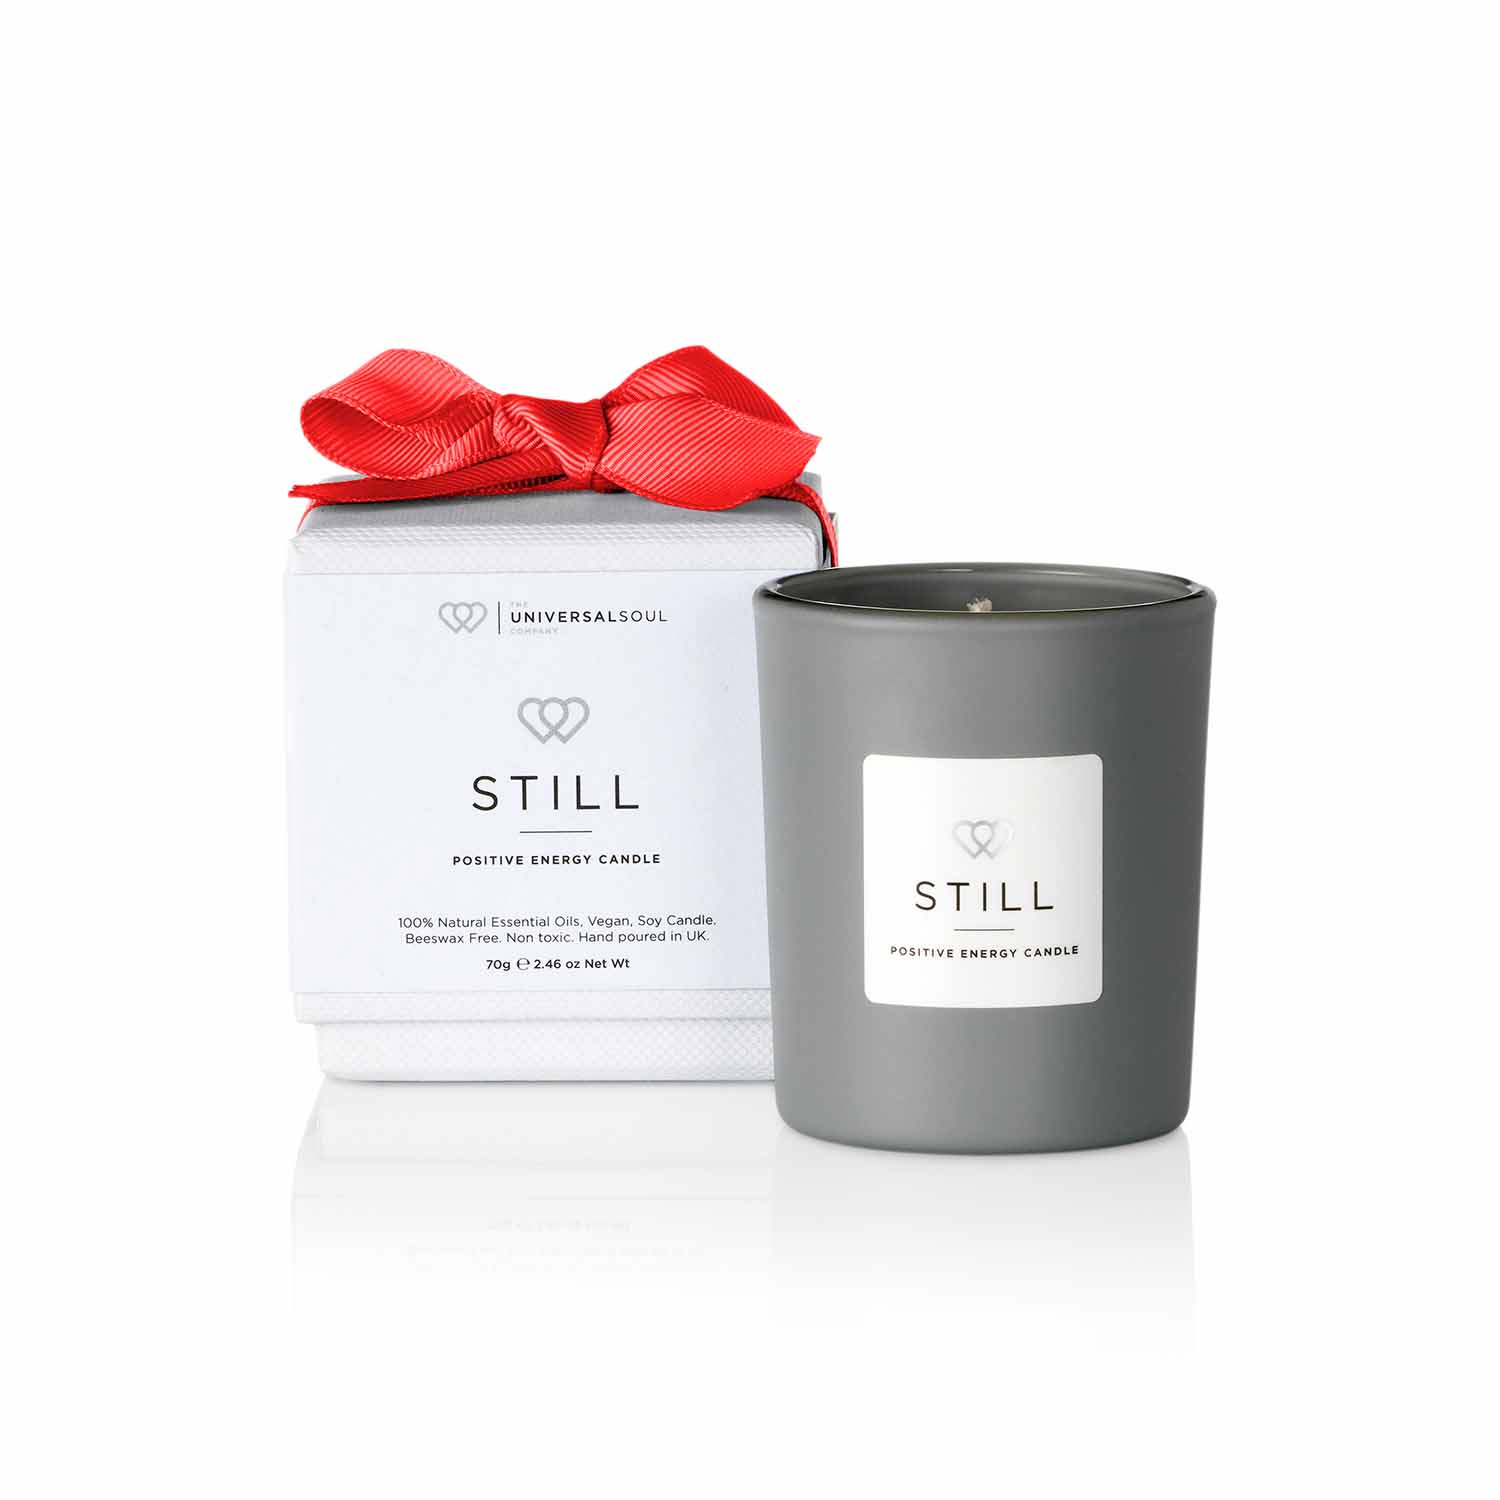 Valentines:Wedding 30cl Candle matt grey with packaging and red bow - The Universal Soul Company 1500px - The Universal Soul Company